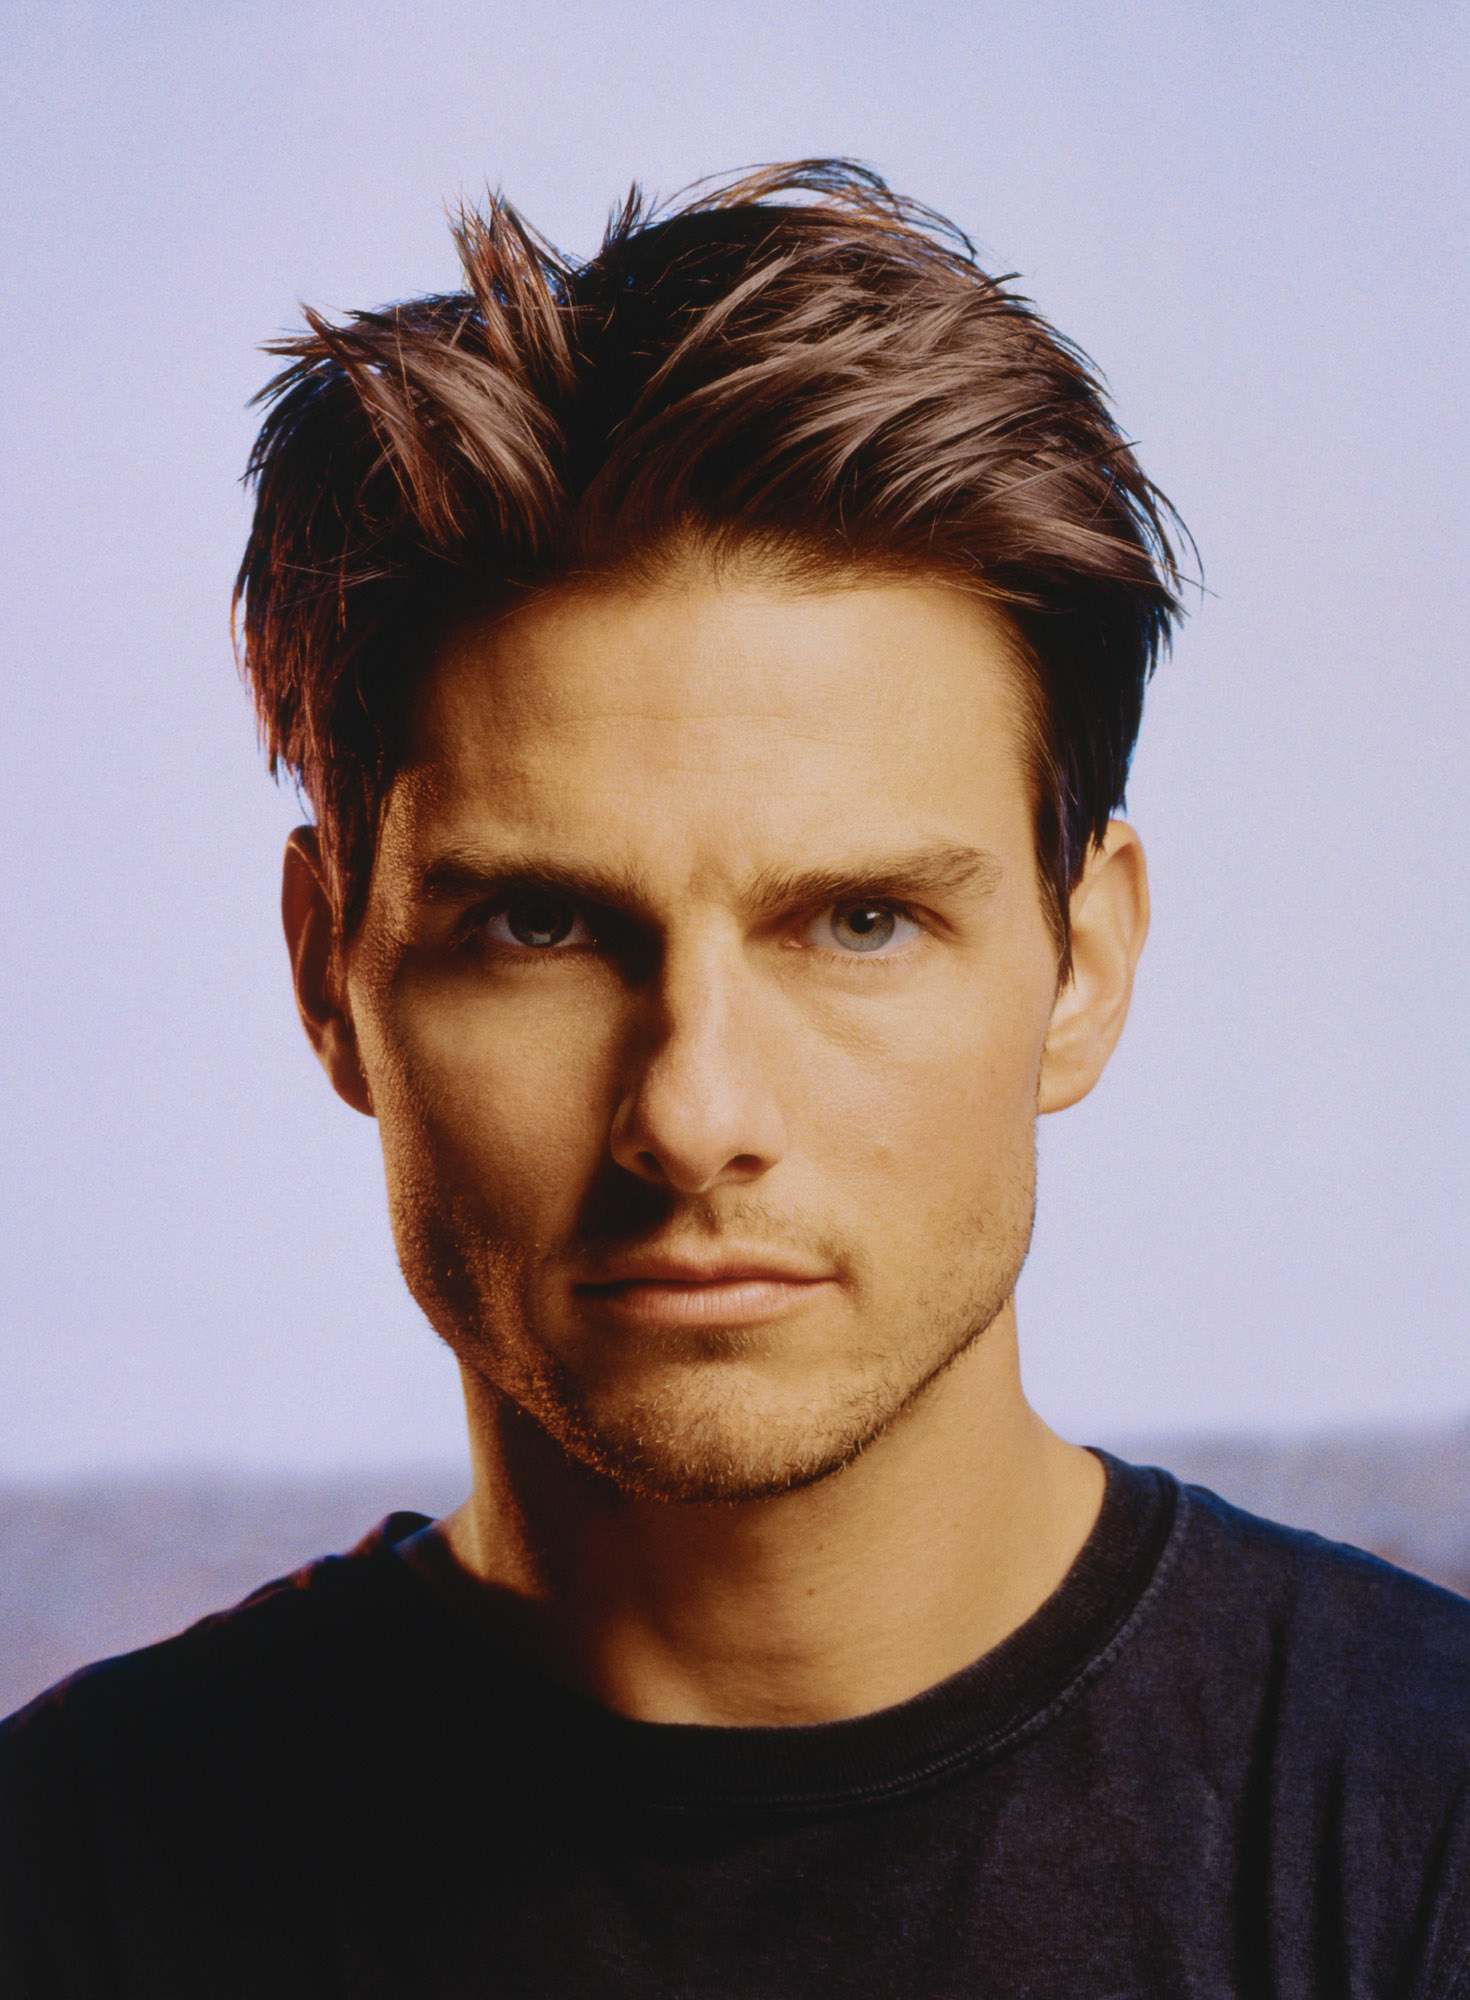 https://www.picsofcelebrities.com/celebrity/tom-cruise/pictures/large/tom-cruise-wallpaper.jpg